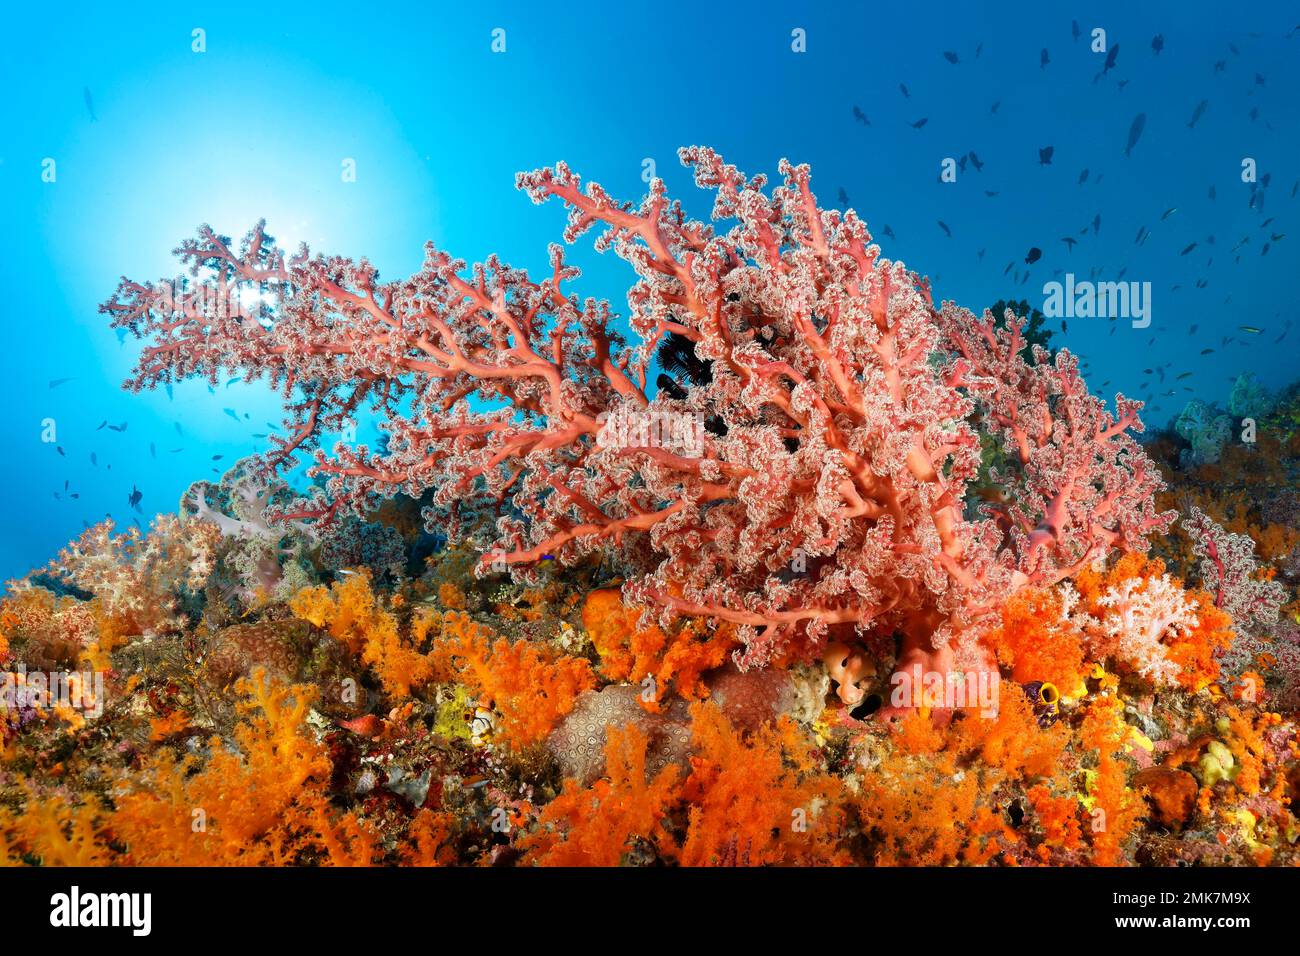 Coral reef in backlight, sun, densely covered with various soft corals, above cherry blossom coral (Siphonogorgia godeffroyi), Pacific, Great Barrier Stock Photo